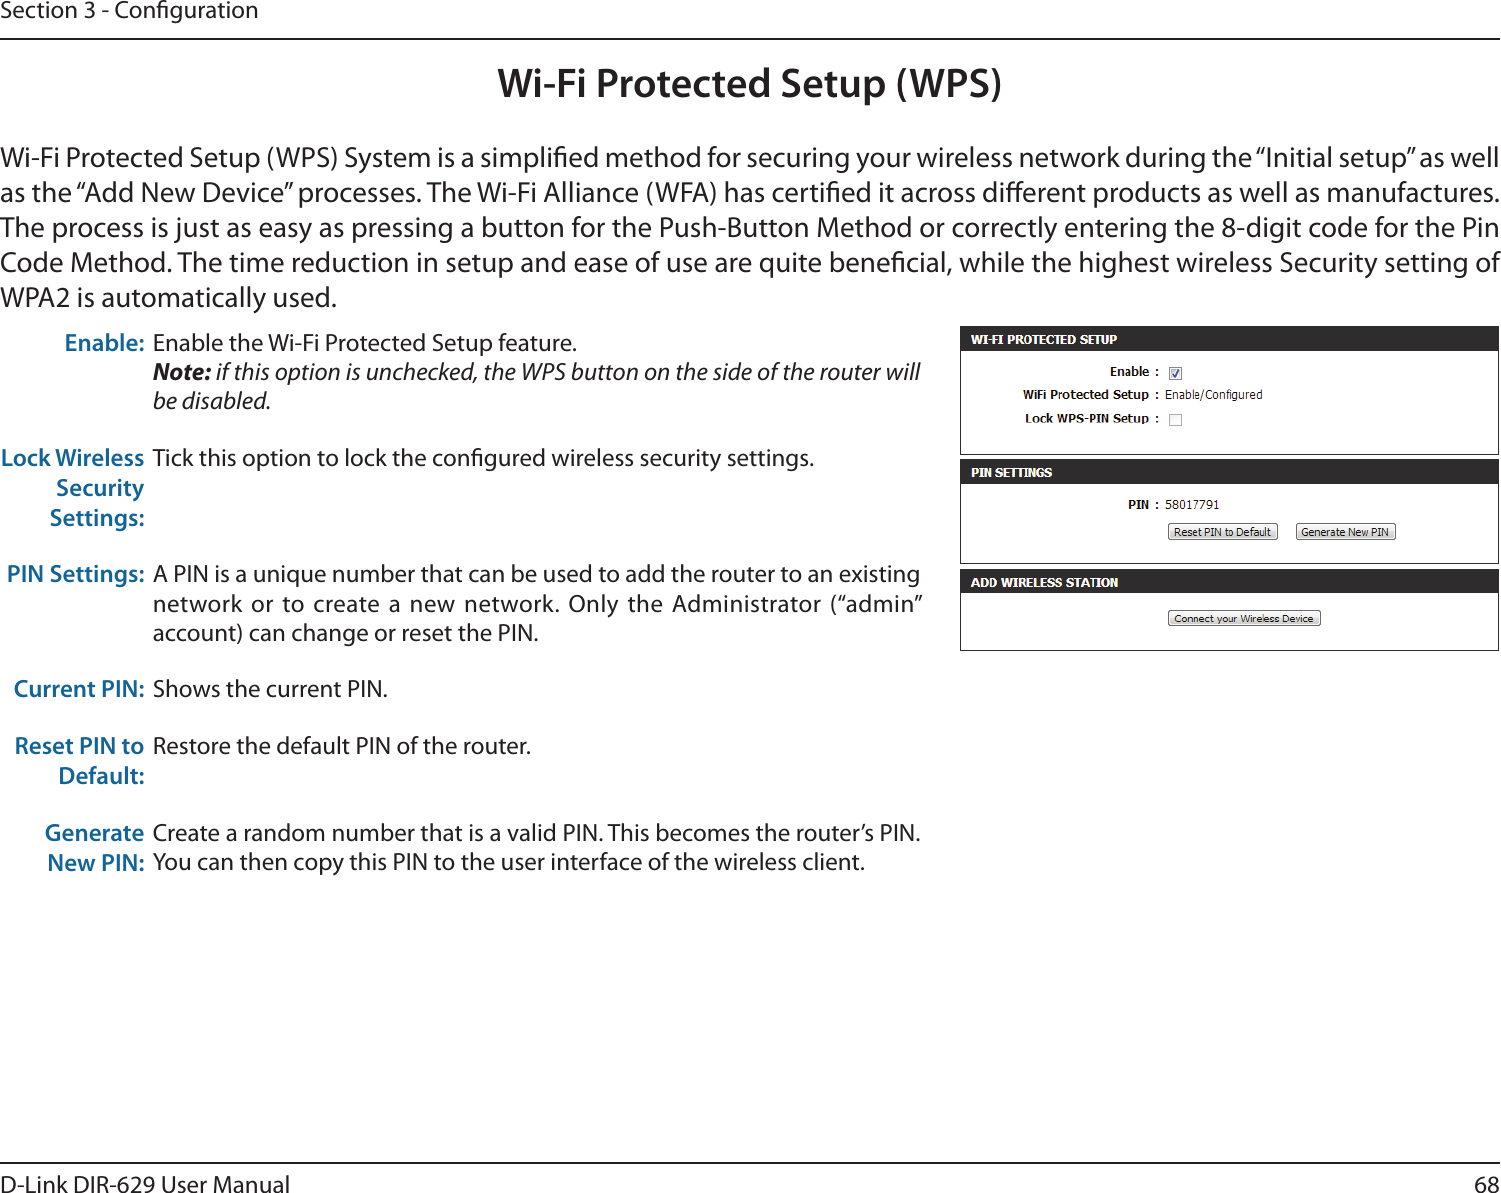 68D-Link DIR-629 User ManualSection 3 - CongurationWi-Fi Protected Setup (WPS)Wi-Fi Protected Setup (WPS) System is a simplied method for securing your wireless network during the “Initial setup” as well as the “Add New Device” processes. The Wi-Fi Alliance (WFA) has certied it across dierent products as well as manufactures. WPA2 is automatically used.Enable: Enable the Wi-Fi Protected Setup feature. Note: if this option is unchecked, the WPS button on the side of the router will be disabled.Lock Wireless Security Settings:Tick this option to lock the congured wireless security settings.PIN Settings: network or to create a new network. Only the Administrator (“admin” account) can change or reset the PIN.Current PIN: Shows the current PIN.Reset PIN to Default:Generate New PIN:Create a random number that is a valid PIN. This becomes the router’s PIN. 